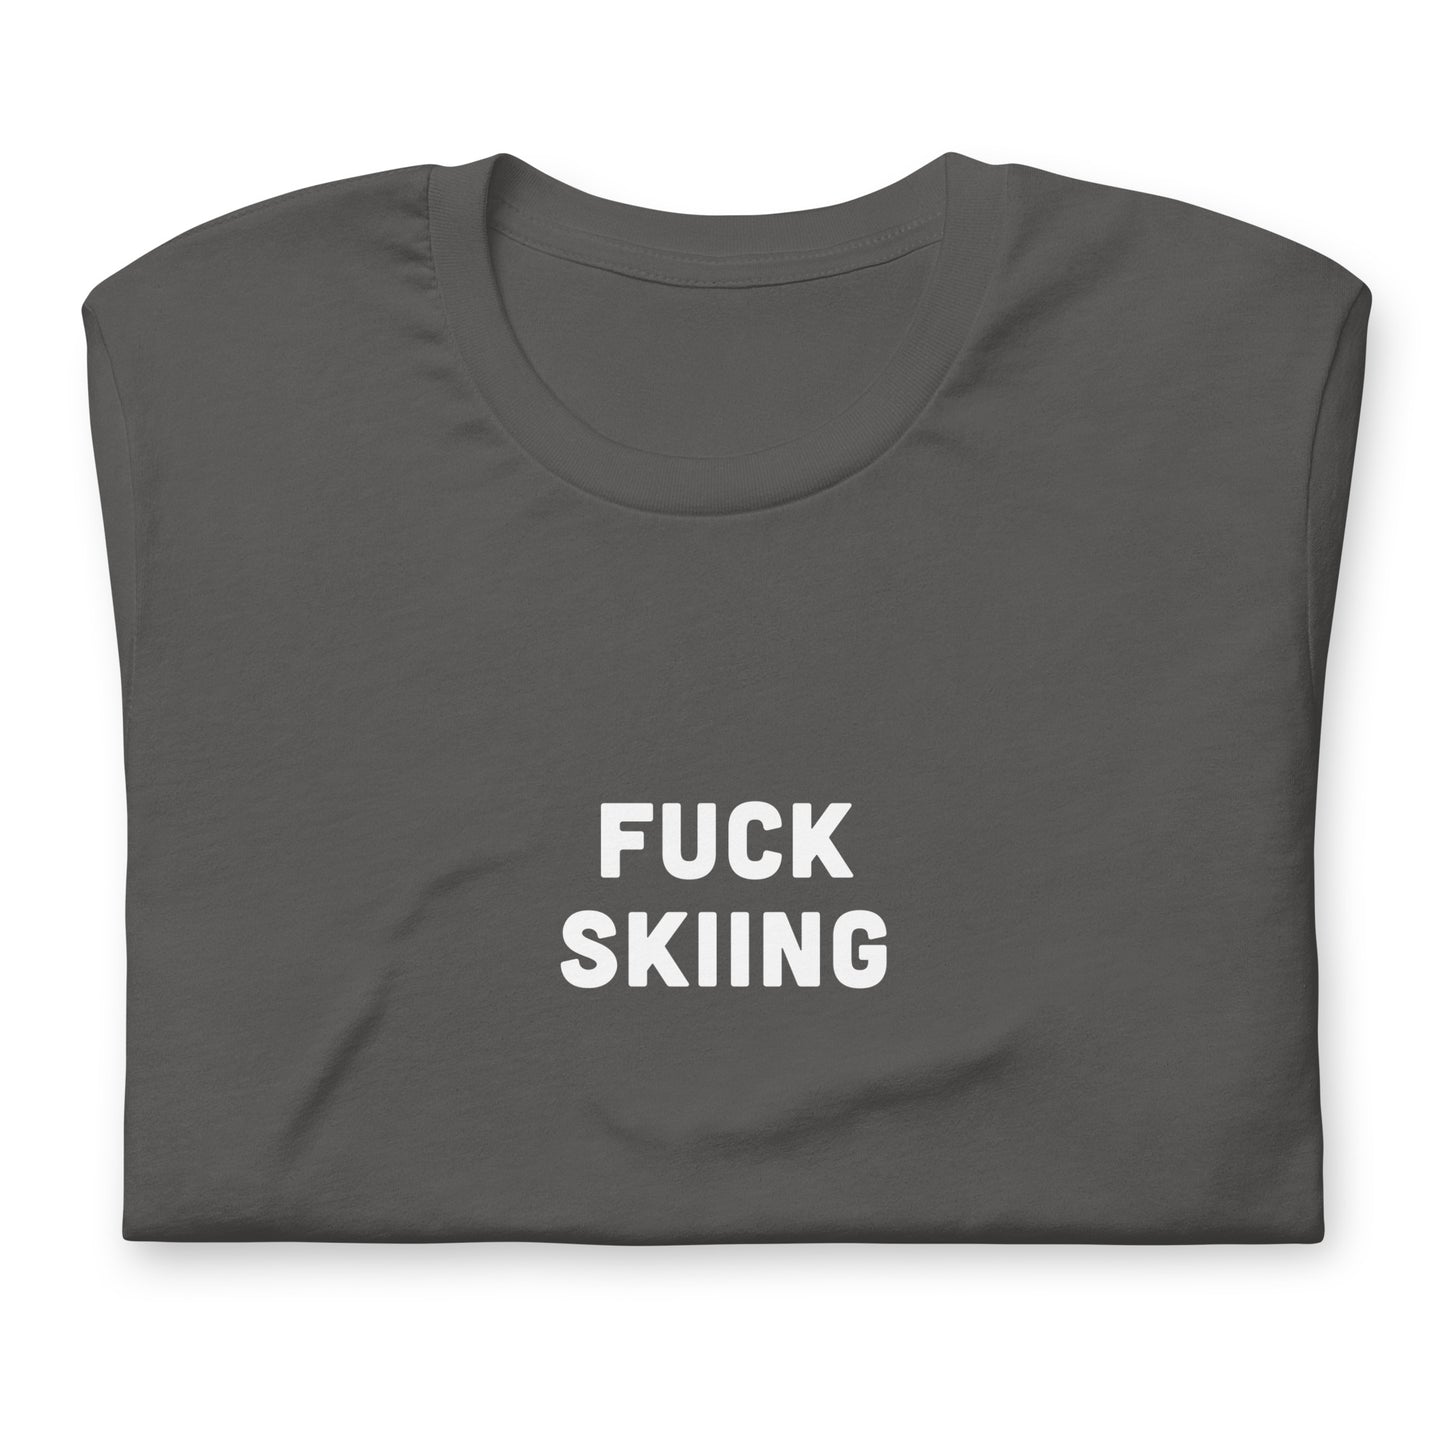 Fuck Skiing T-Shirt Size 2XL Color Black